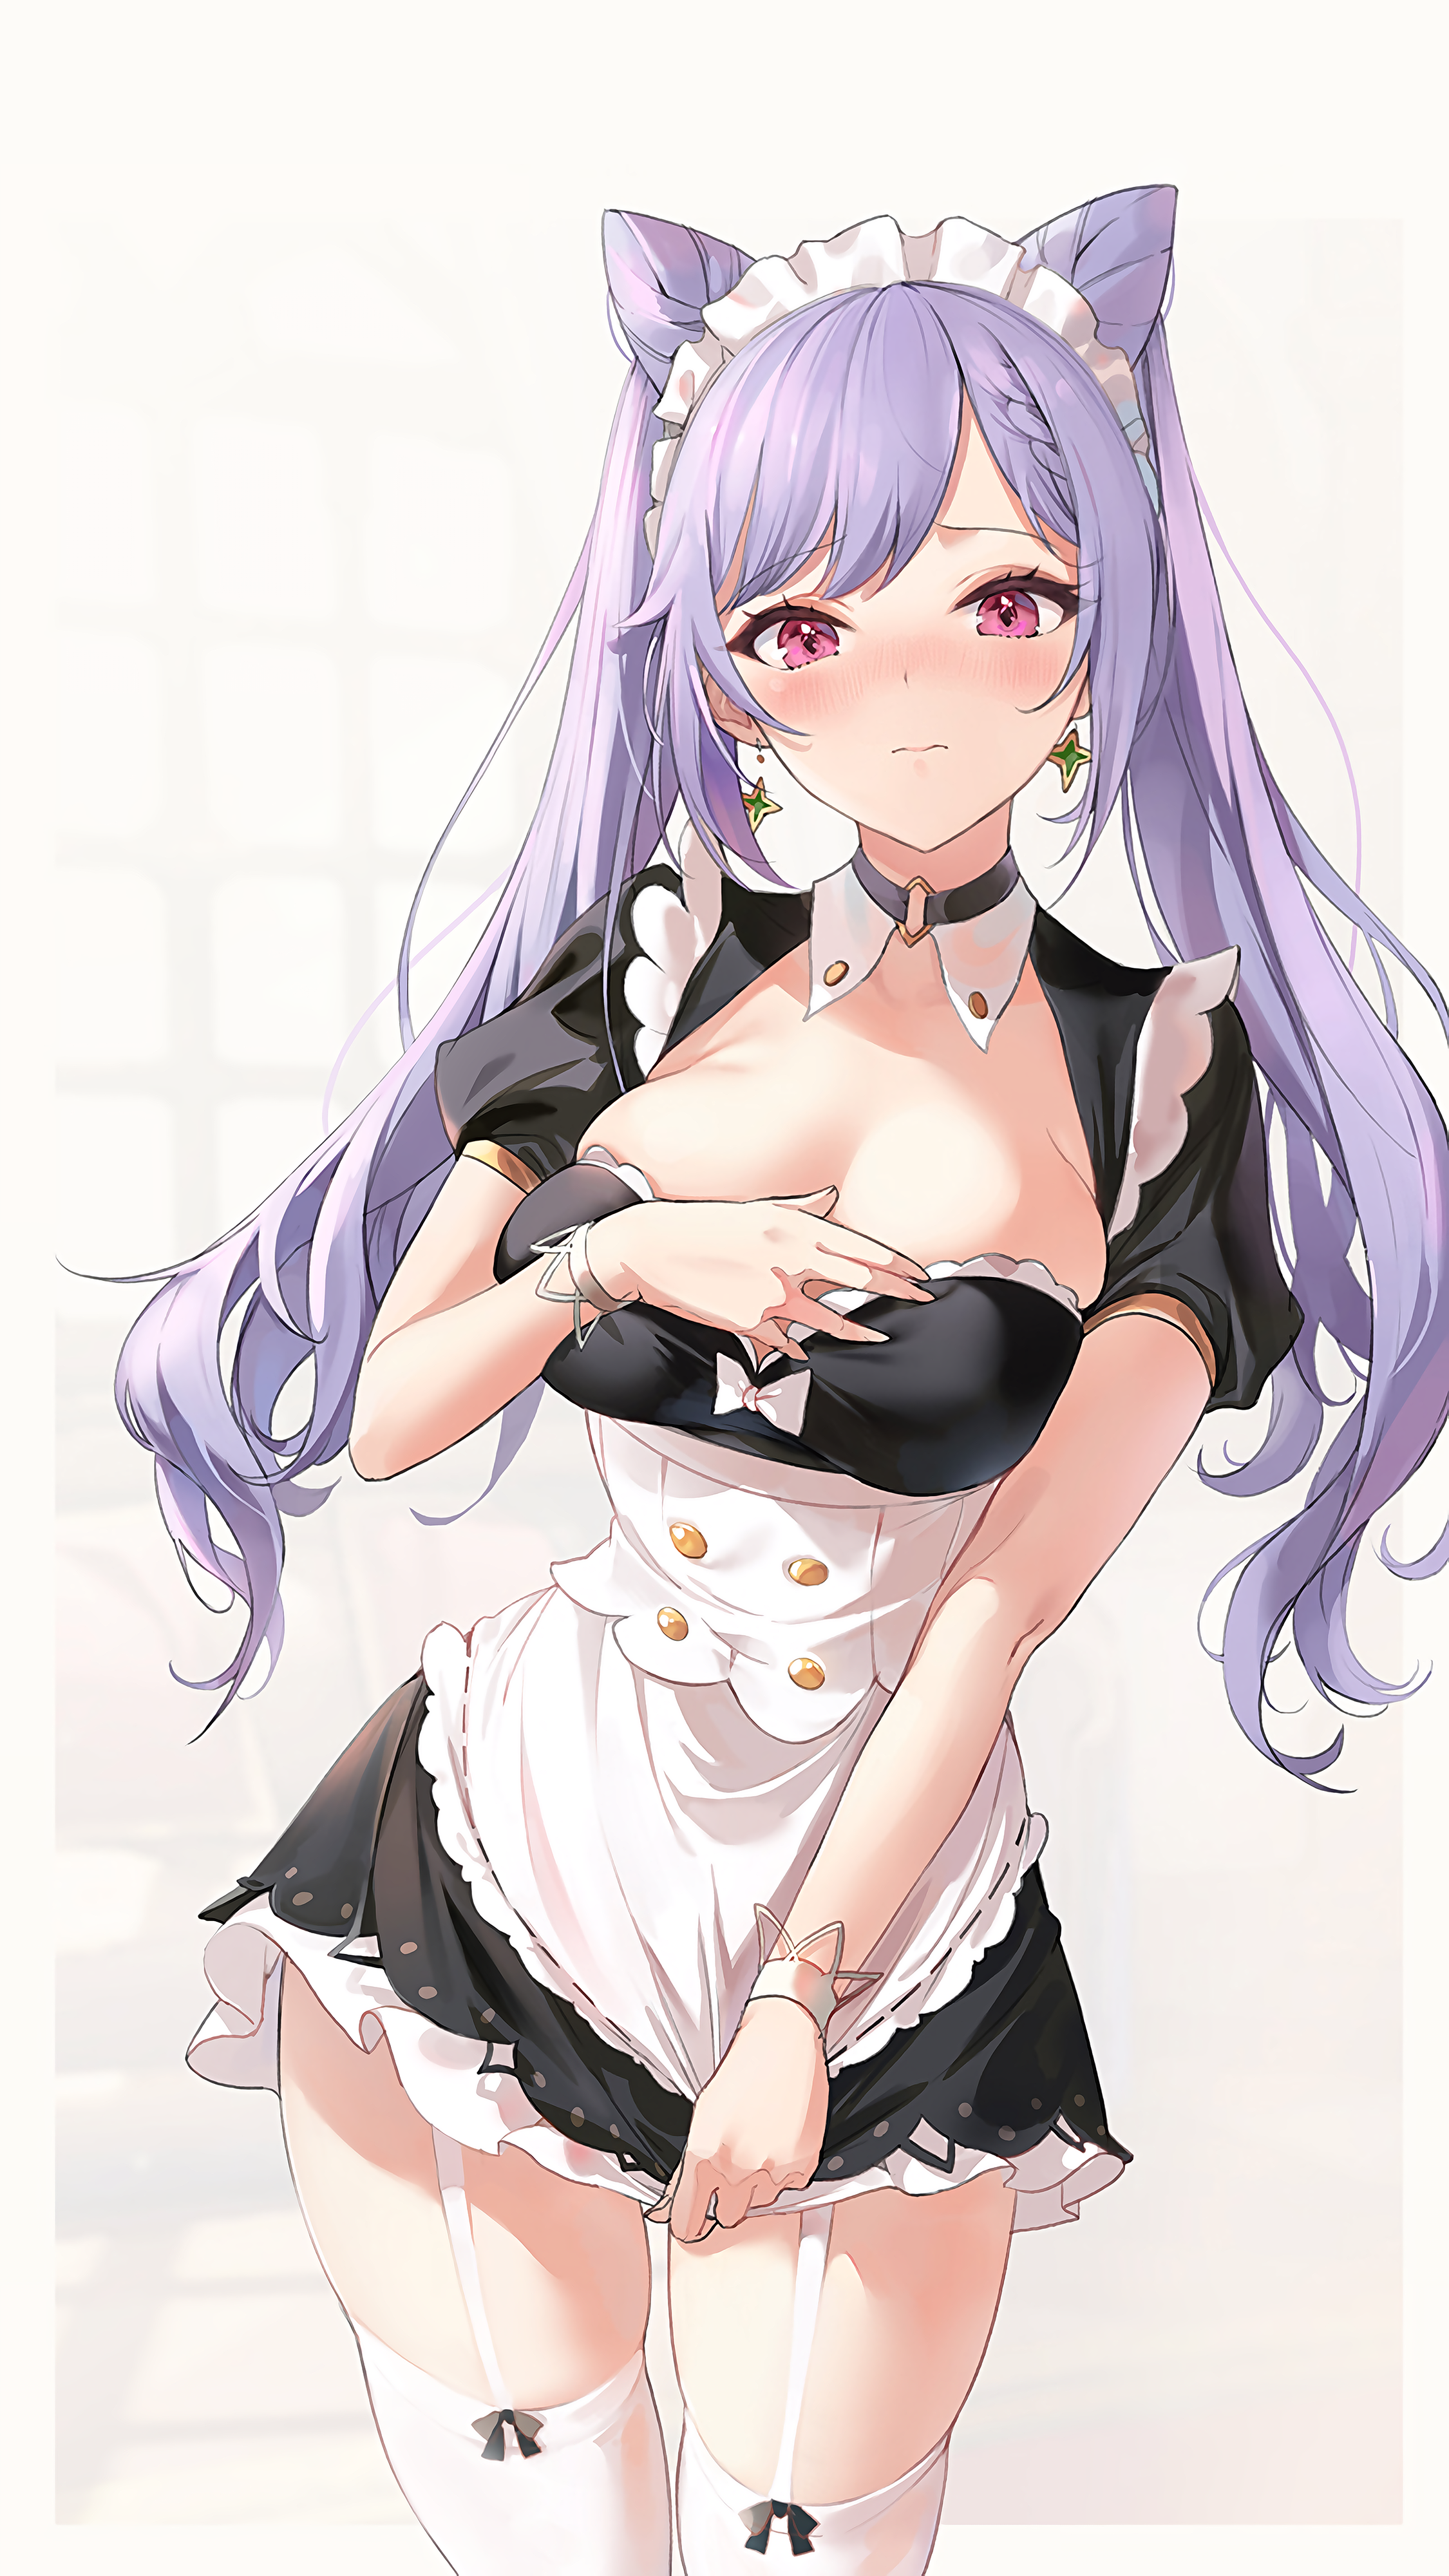 Anime 2250x4000 Genshin Impact anime girls Keqing (Genshin Impact) maid outfit thigh-highs purple eyes twintails pink eyes blushing artwork Yumaomi hands on boobs cleavage thighs embarrassed